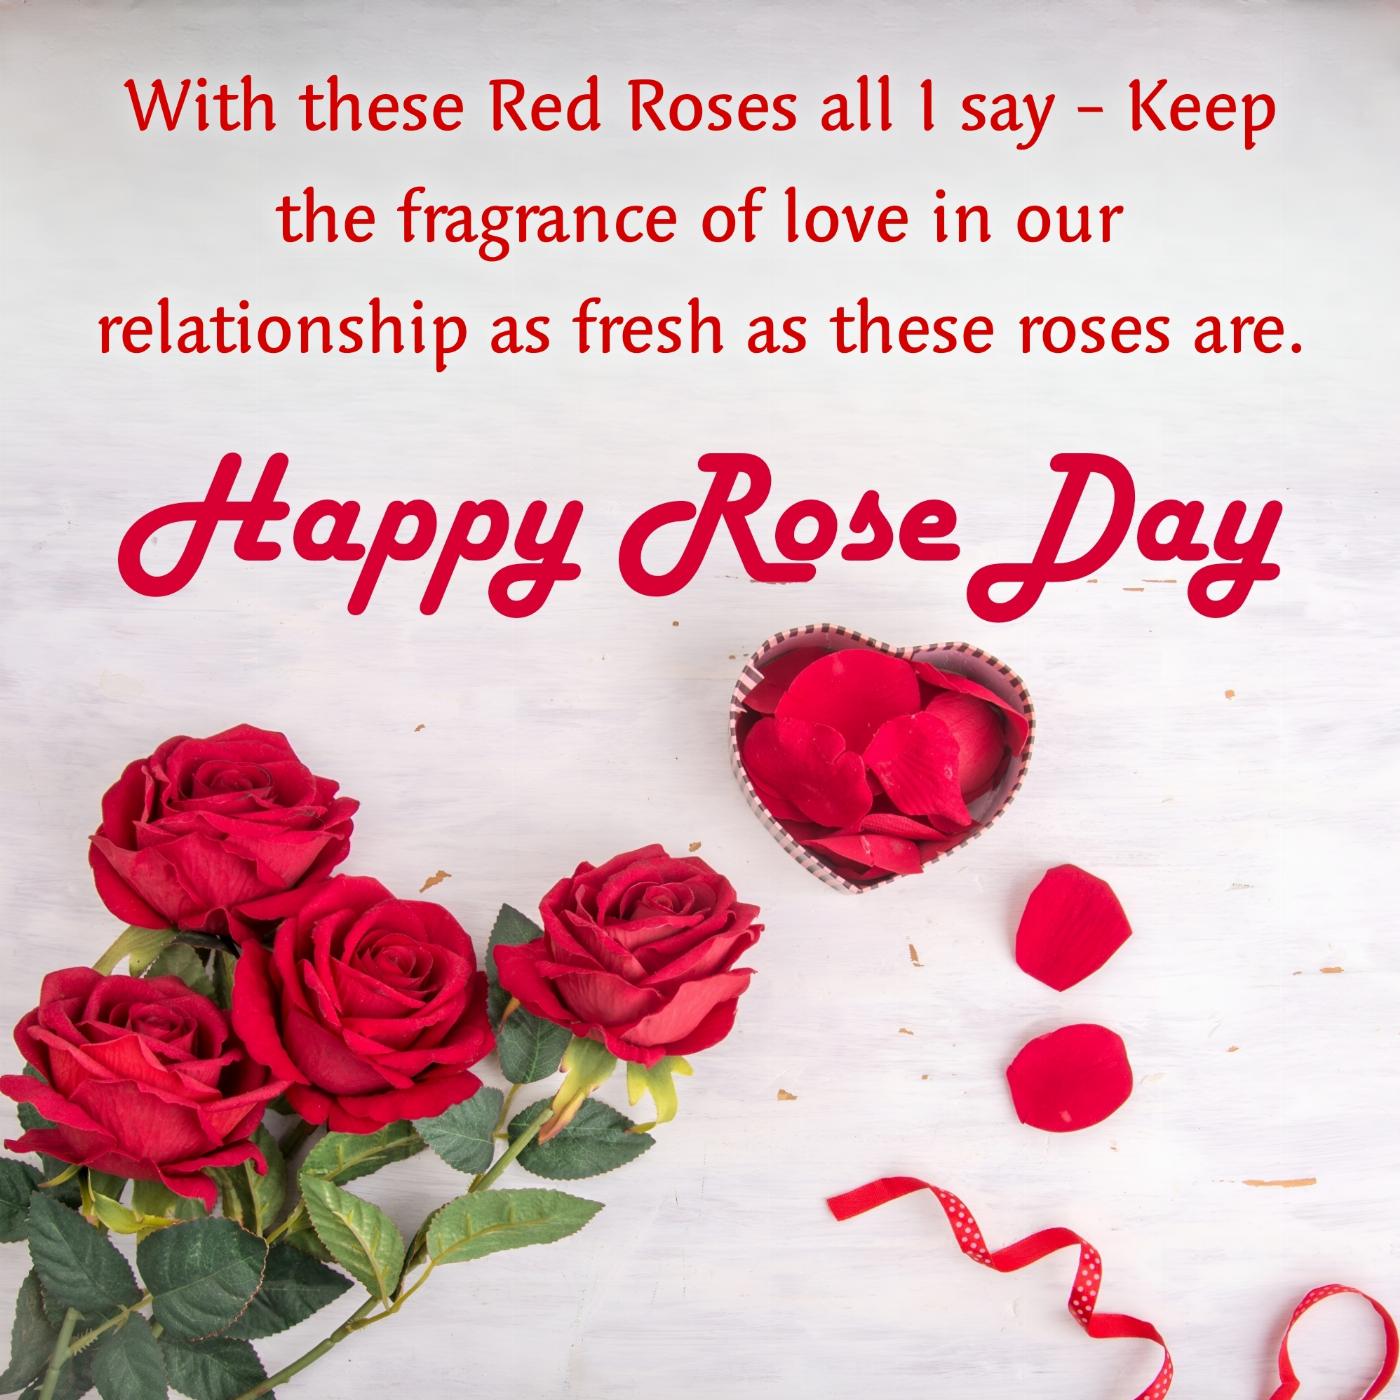 With these Red Roses all I say - Keep the fragrance of love